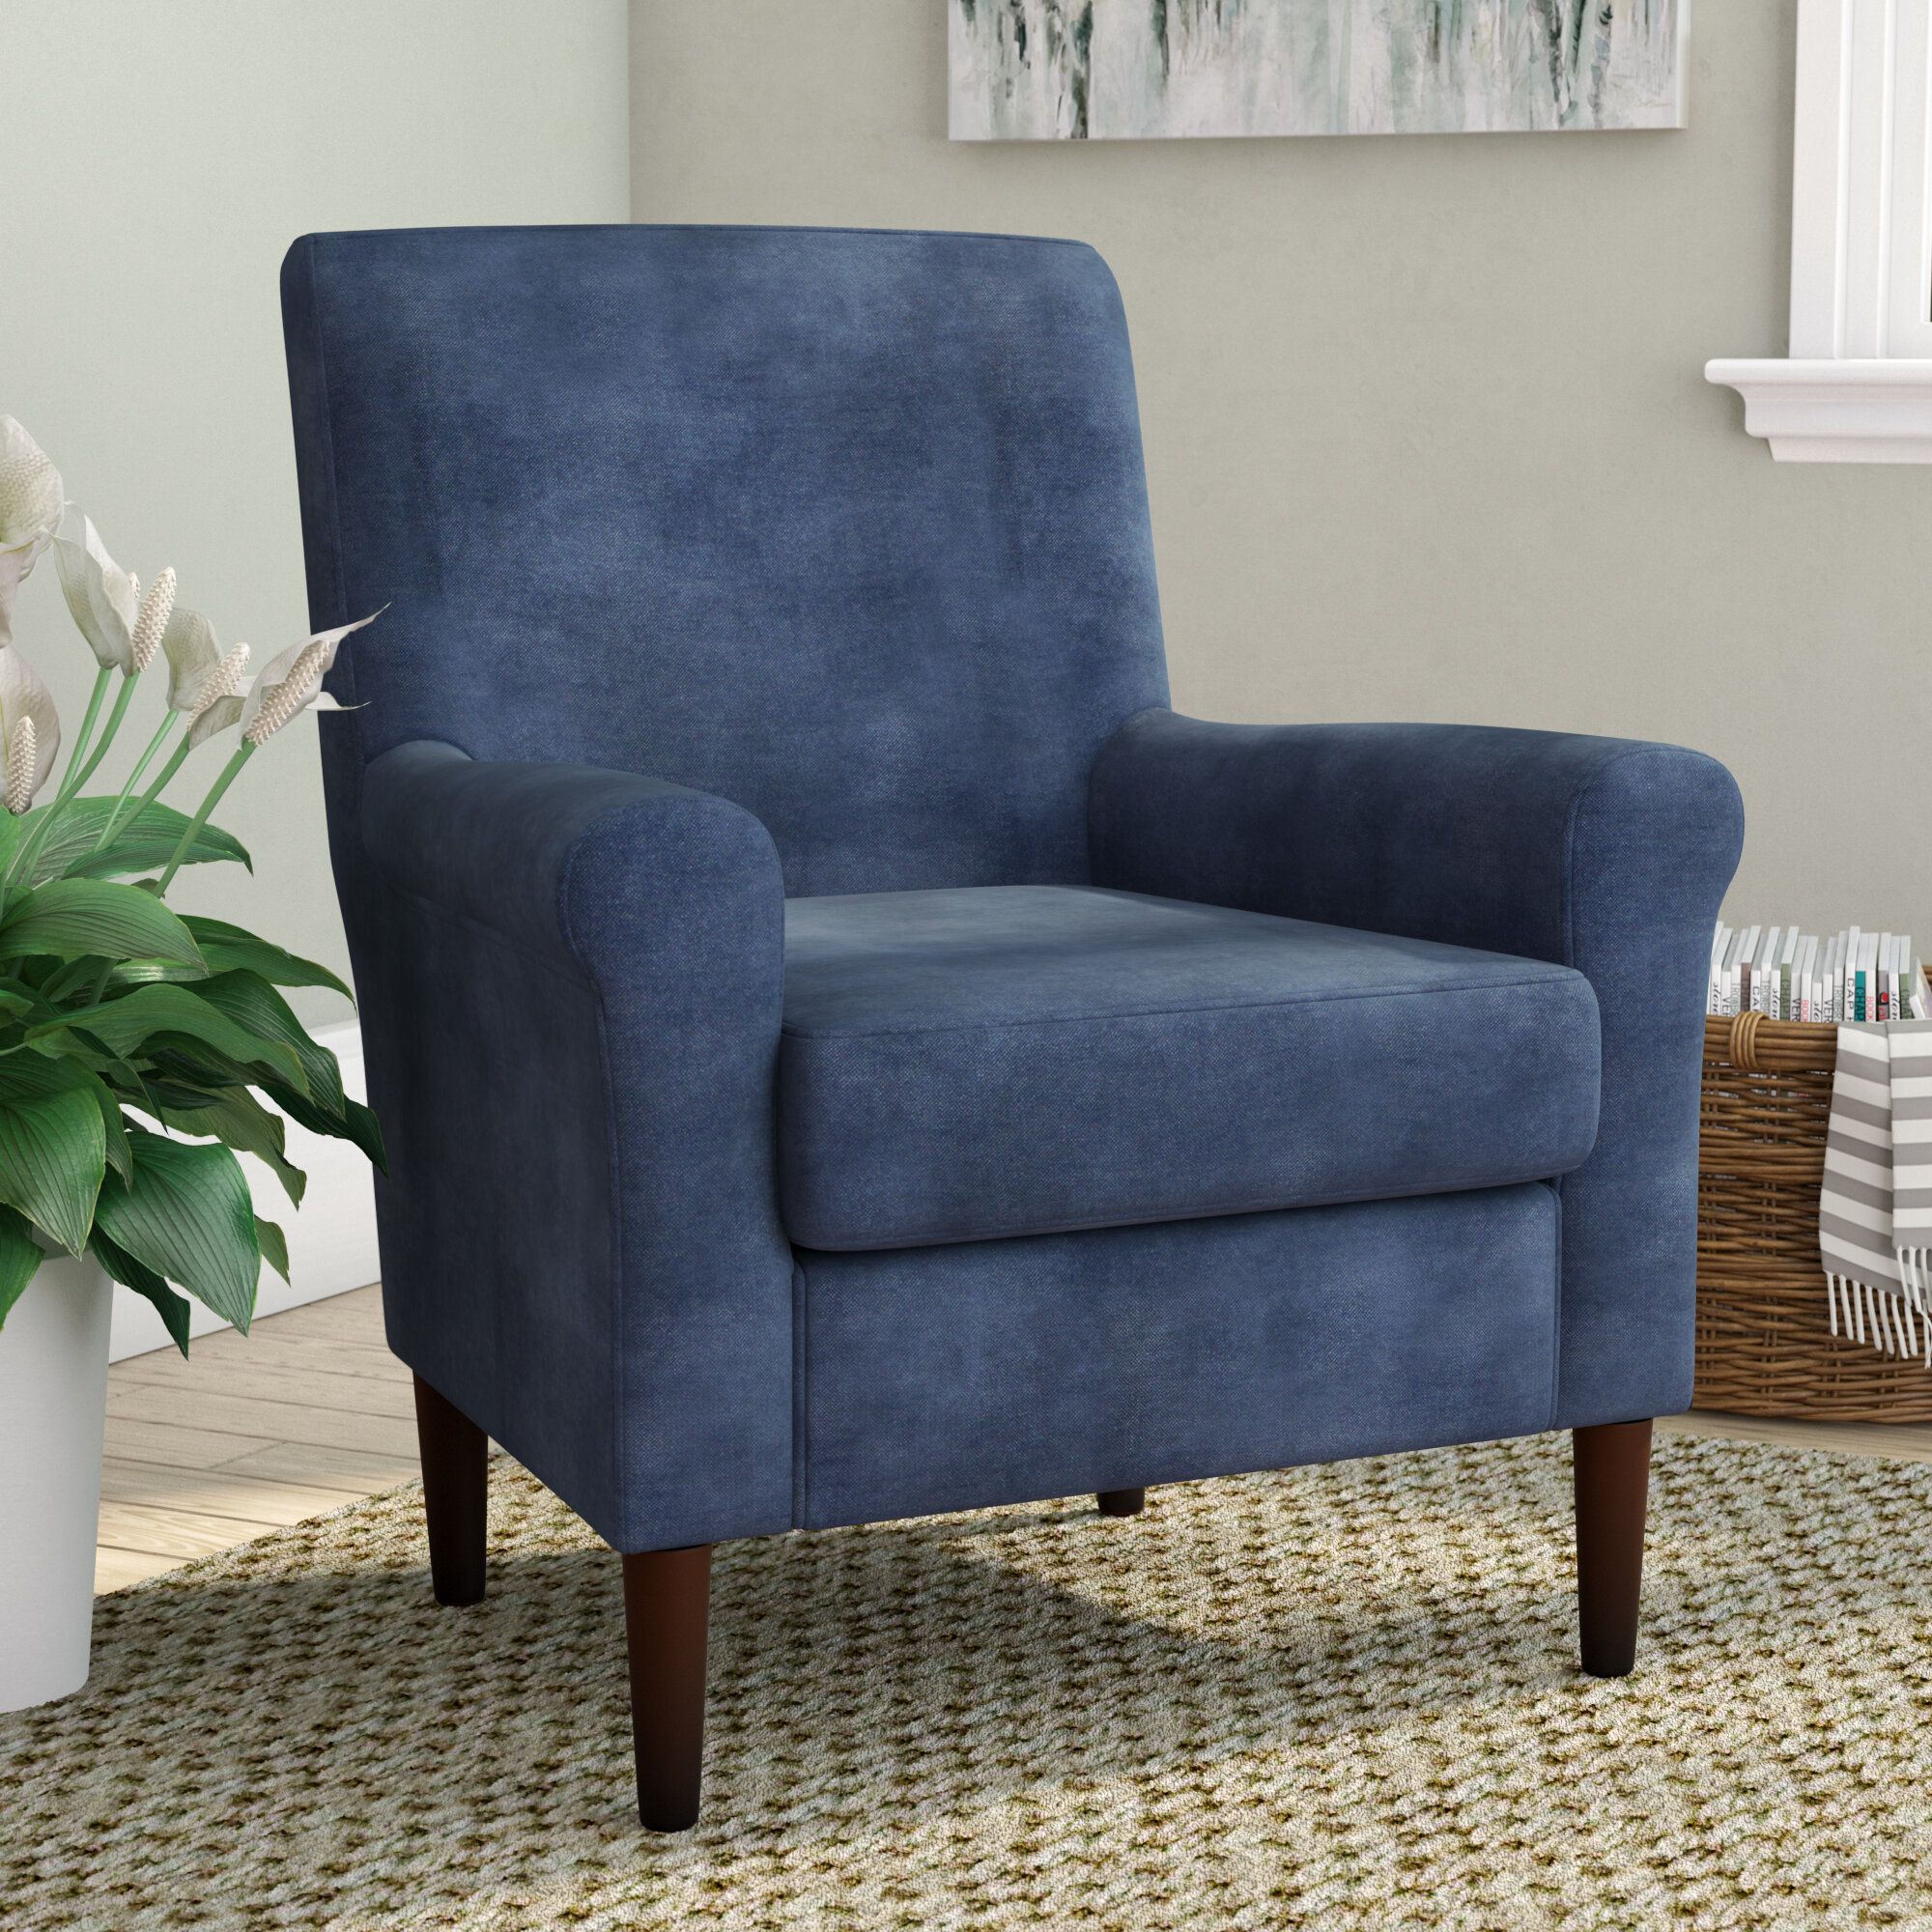 Traditional Chairs You'Ll Love In 2021 | Wayfair Regarding Suki Armchairs By Canora Grey (View 9 of 15)